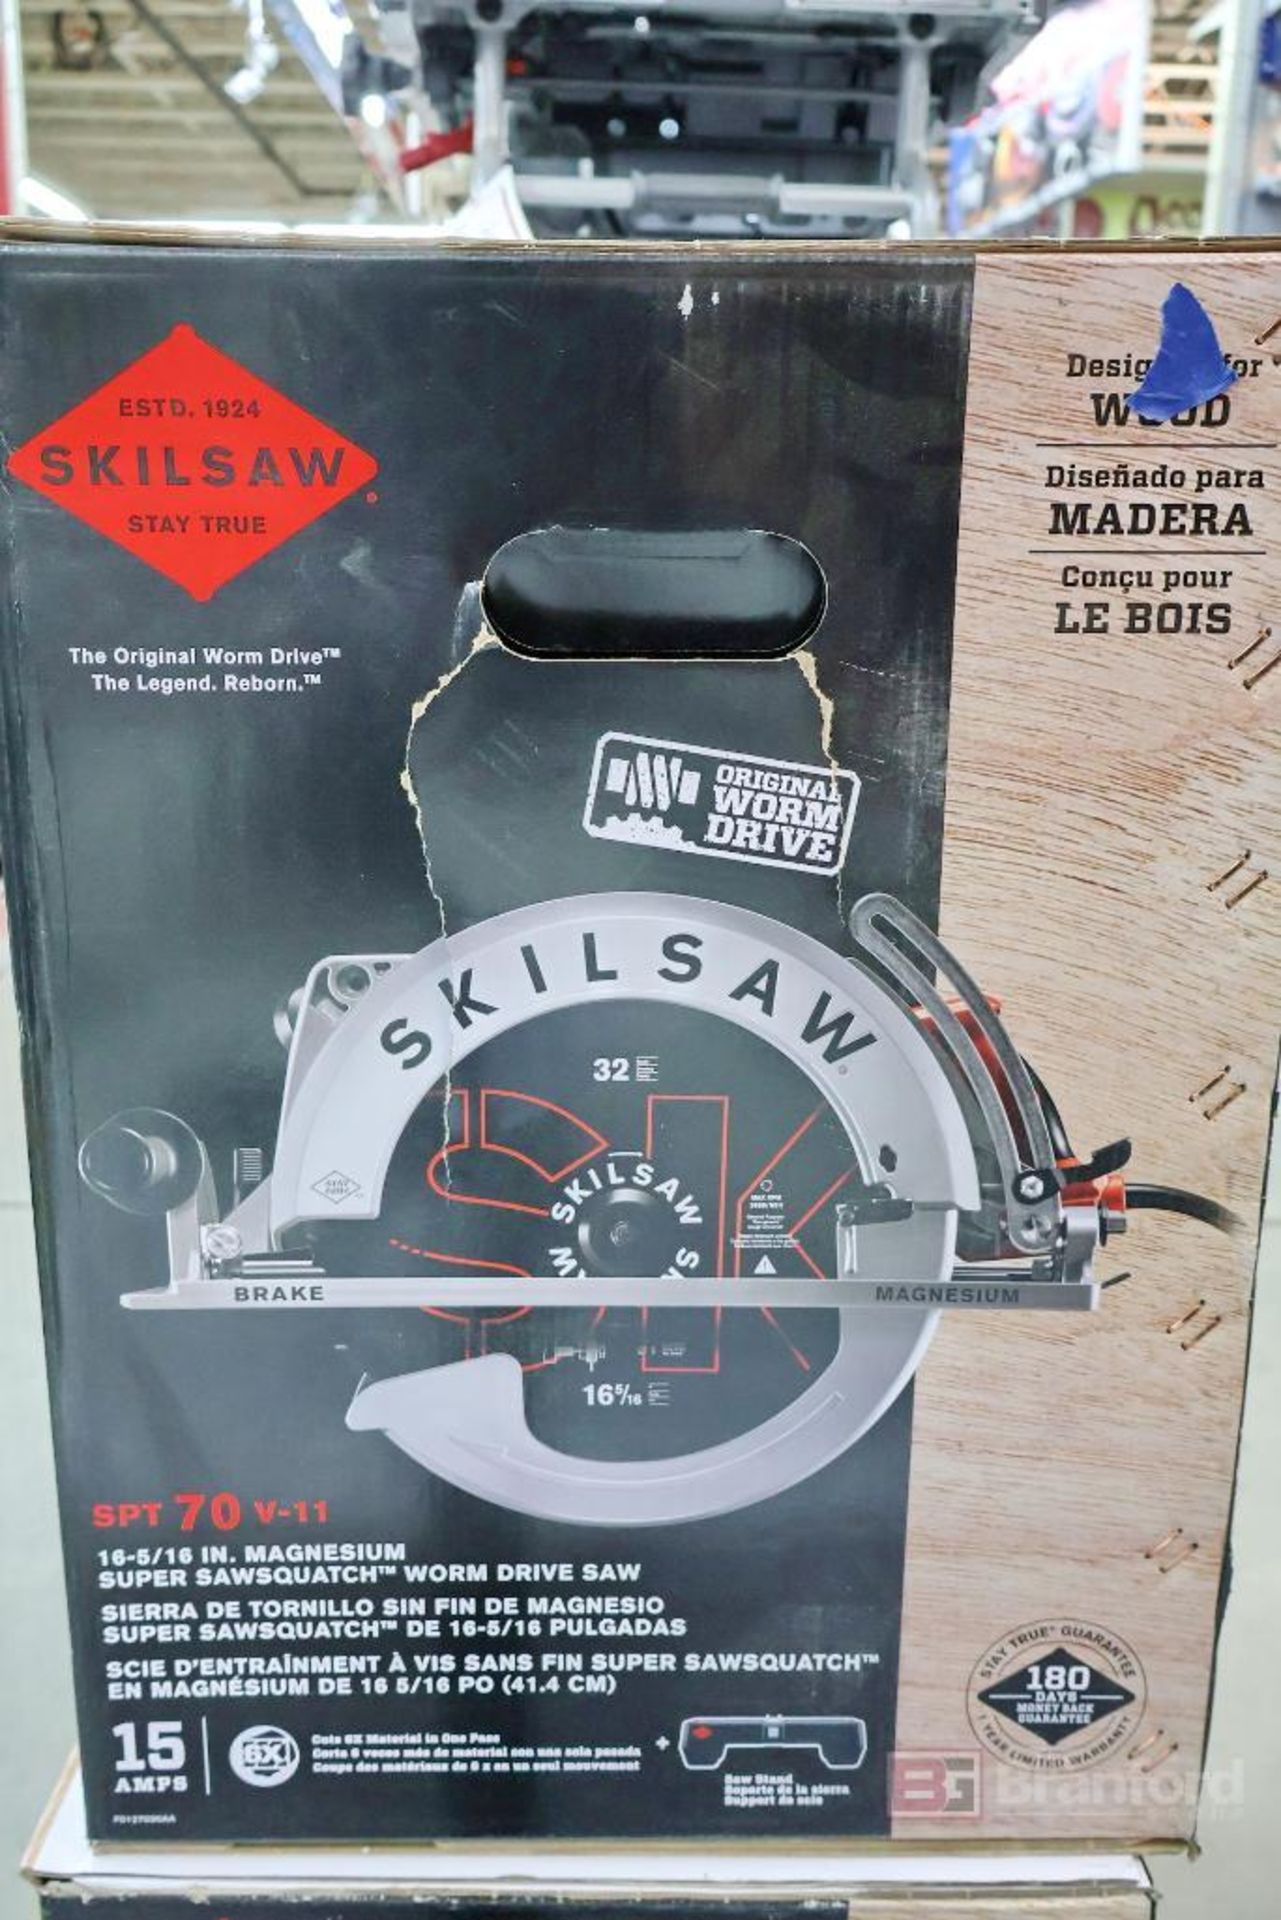 SKILSAW SPT 70 V-11 Magnesium Sawsquatch Worm Drive Saw - Image 4 of 11